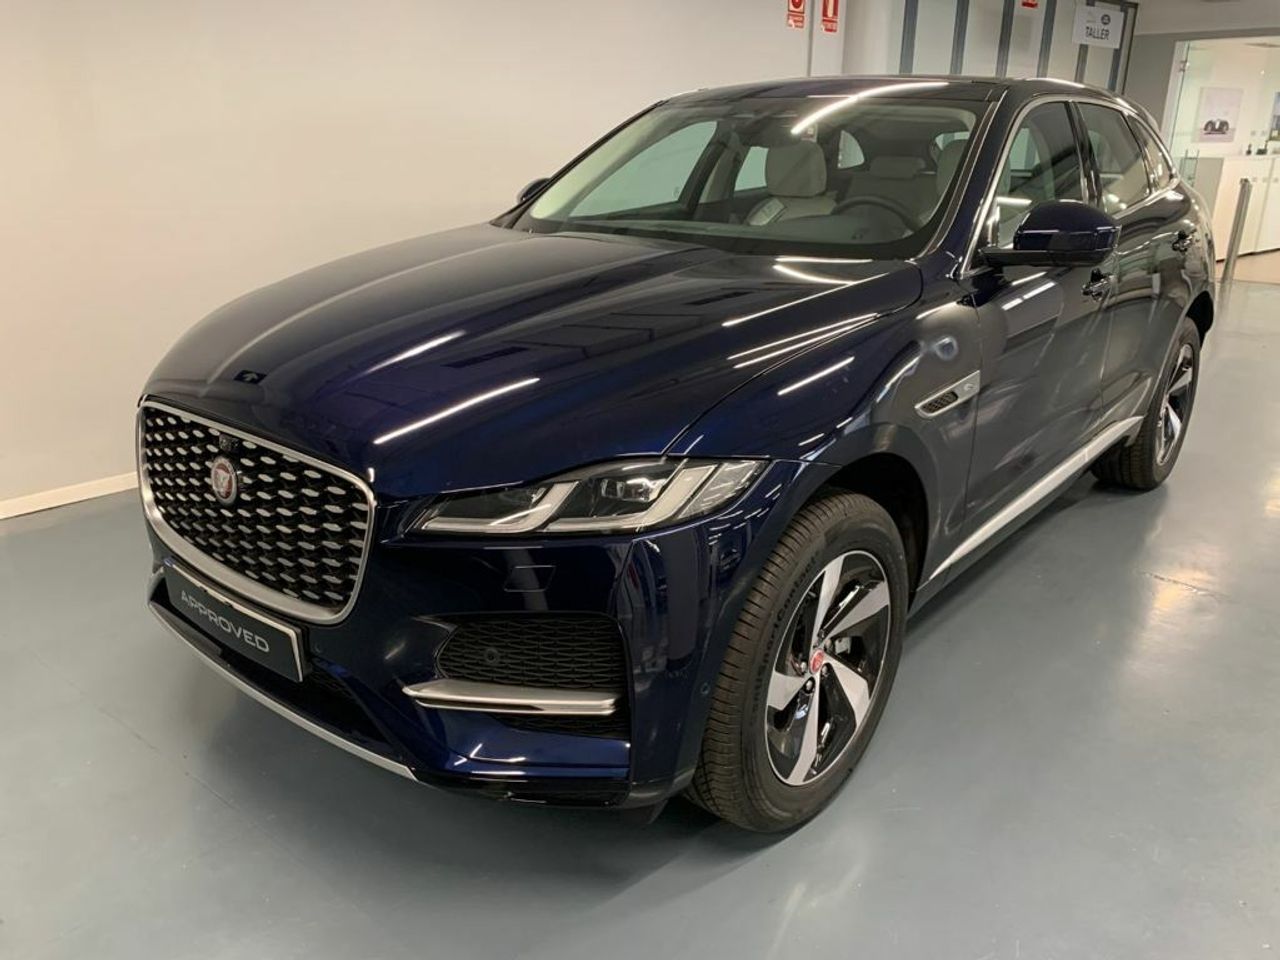 Jgr F-pace 2.0d I4 204ps Awd Auto Mhev S  - Foto 1